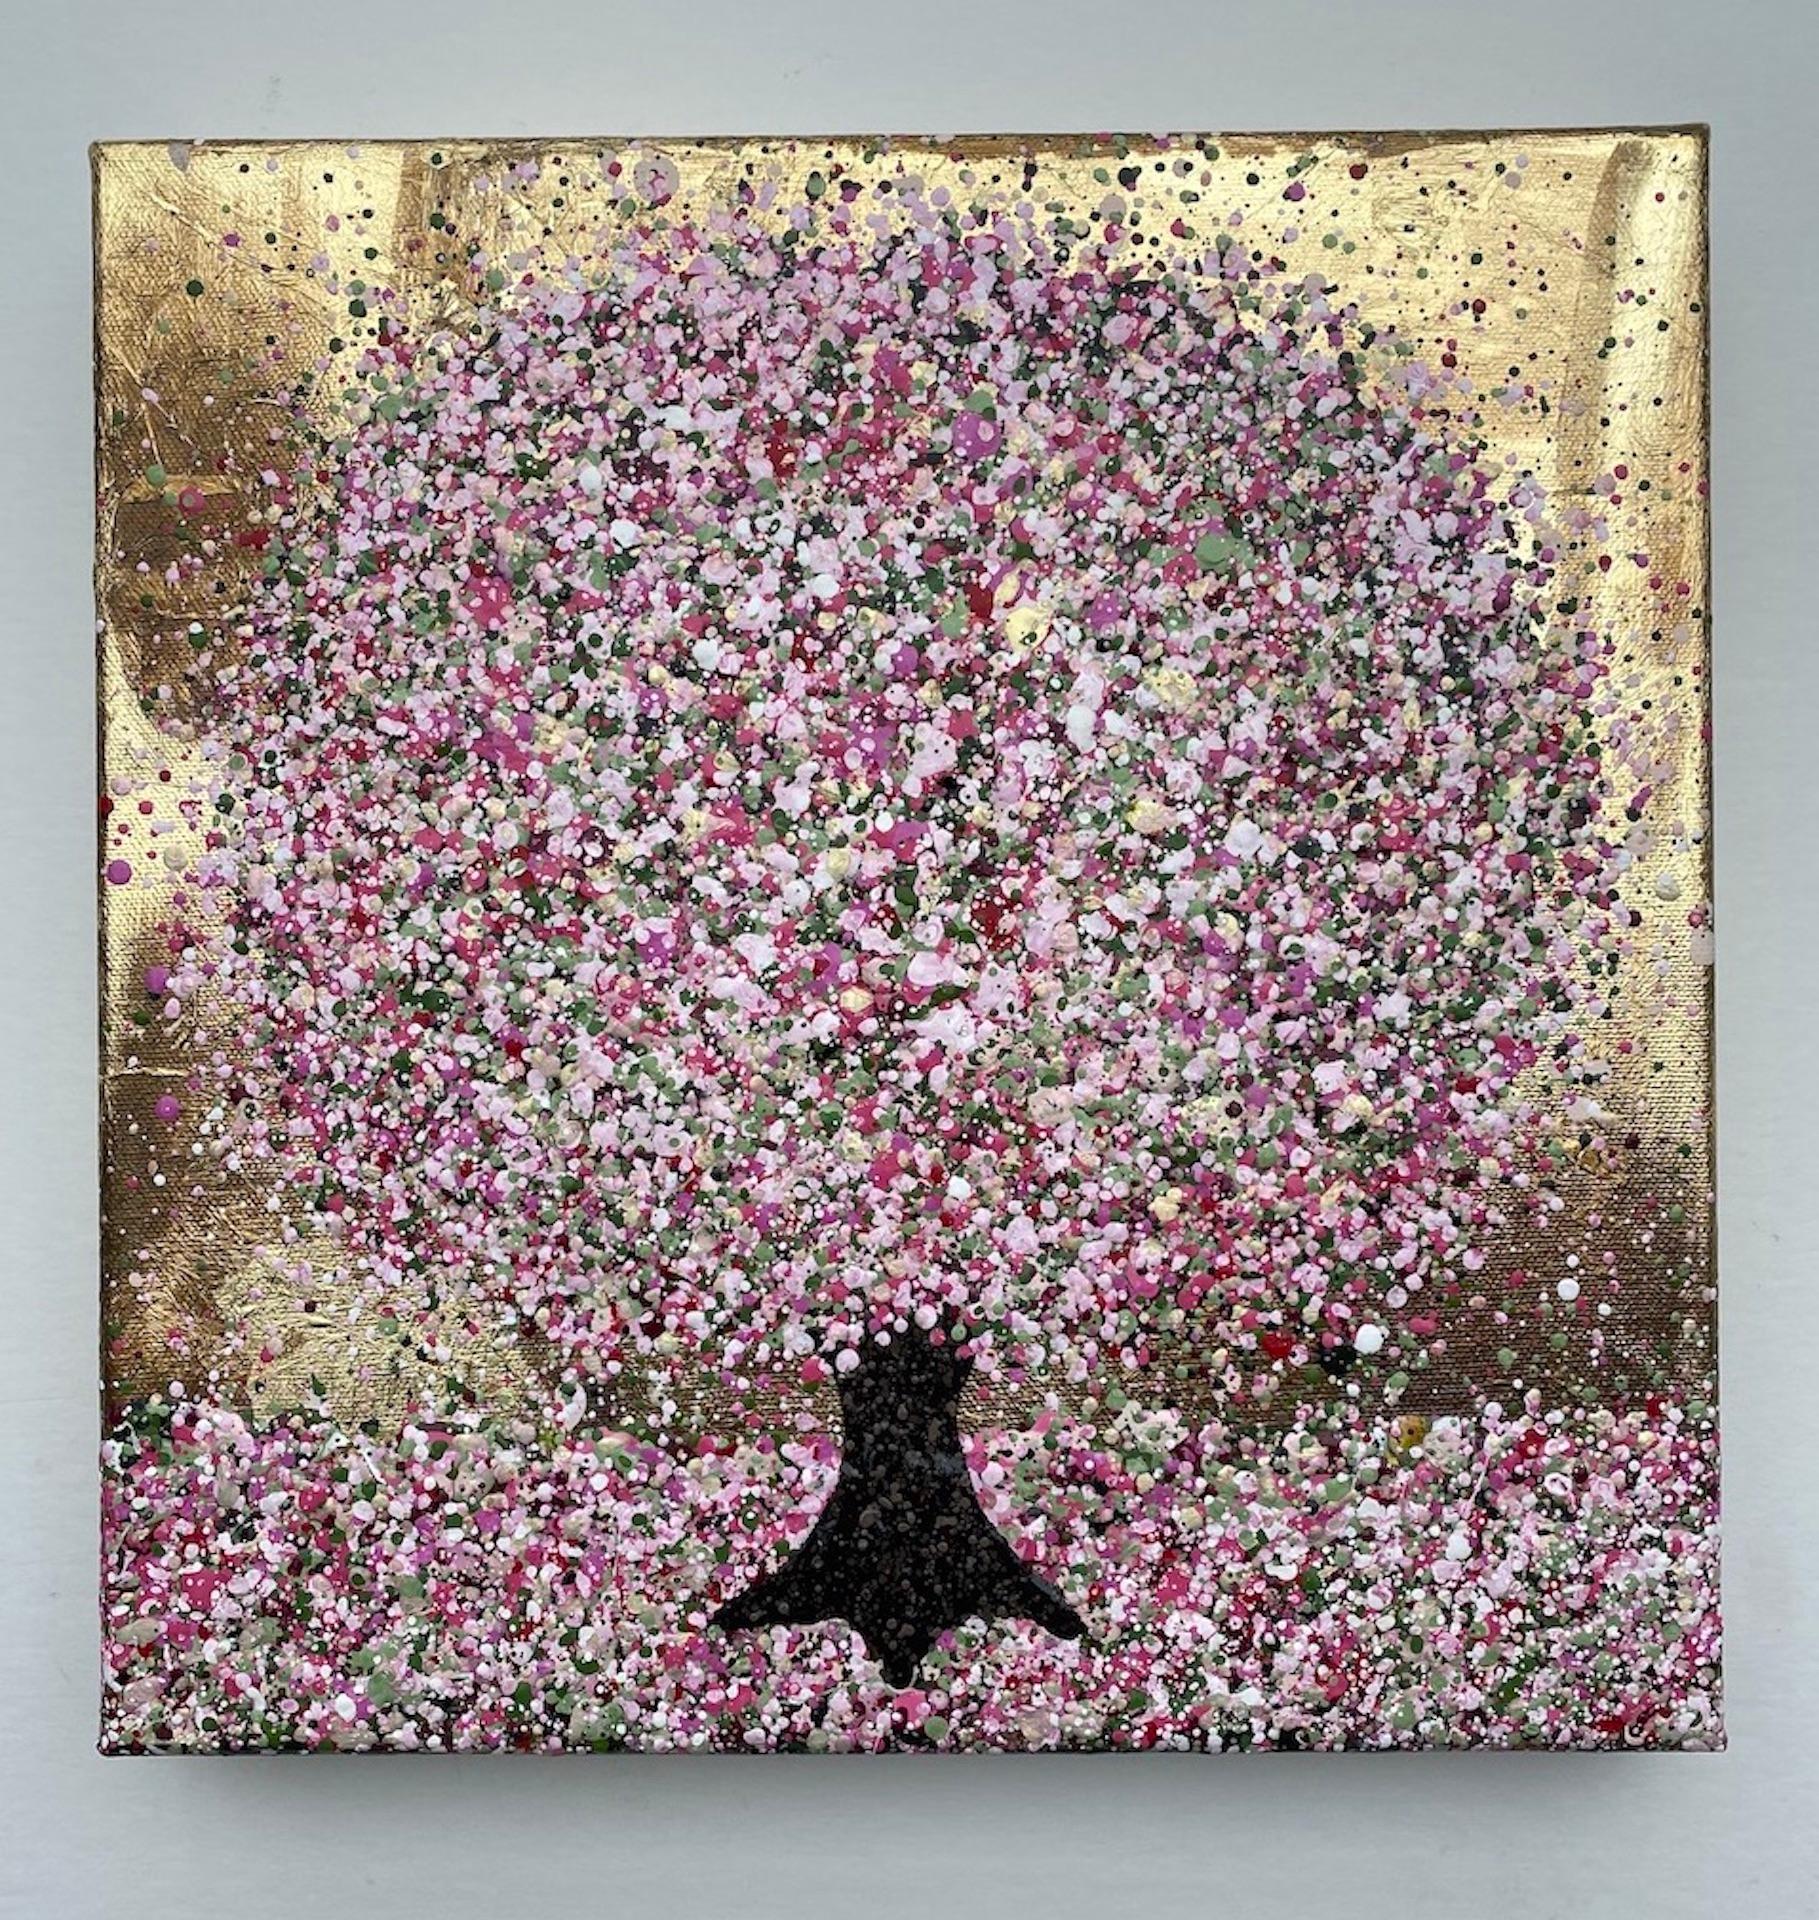 Everlasting Cherry Blossom IV [2021]
Original
Landscape
Acrylic on Canvas
Size: H:30 cm x W:30 cm x D:4cm
Sold Unframed
Please note that insitu images are purely an indication of how a piece may look

Everlasting Cherry Blossom IV is an original